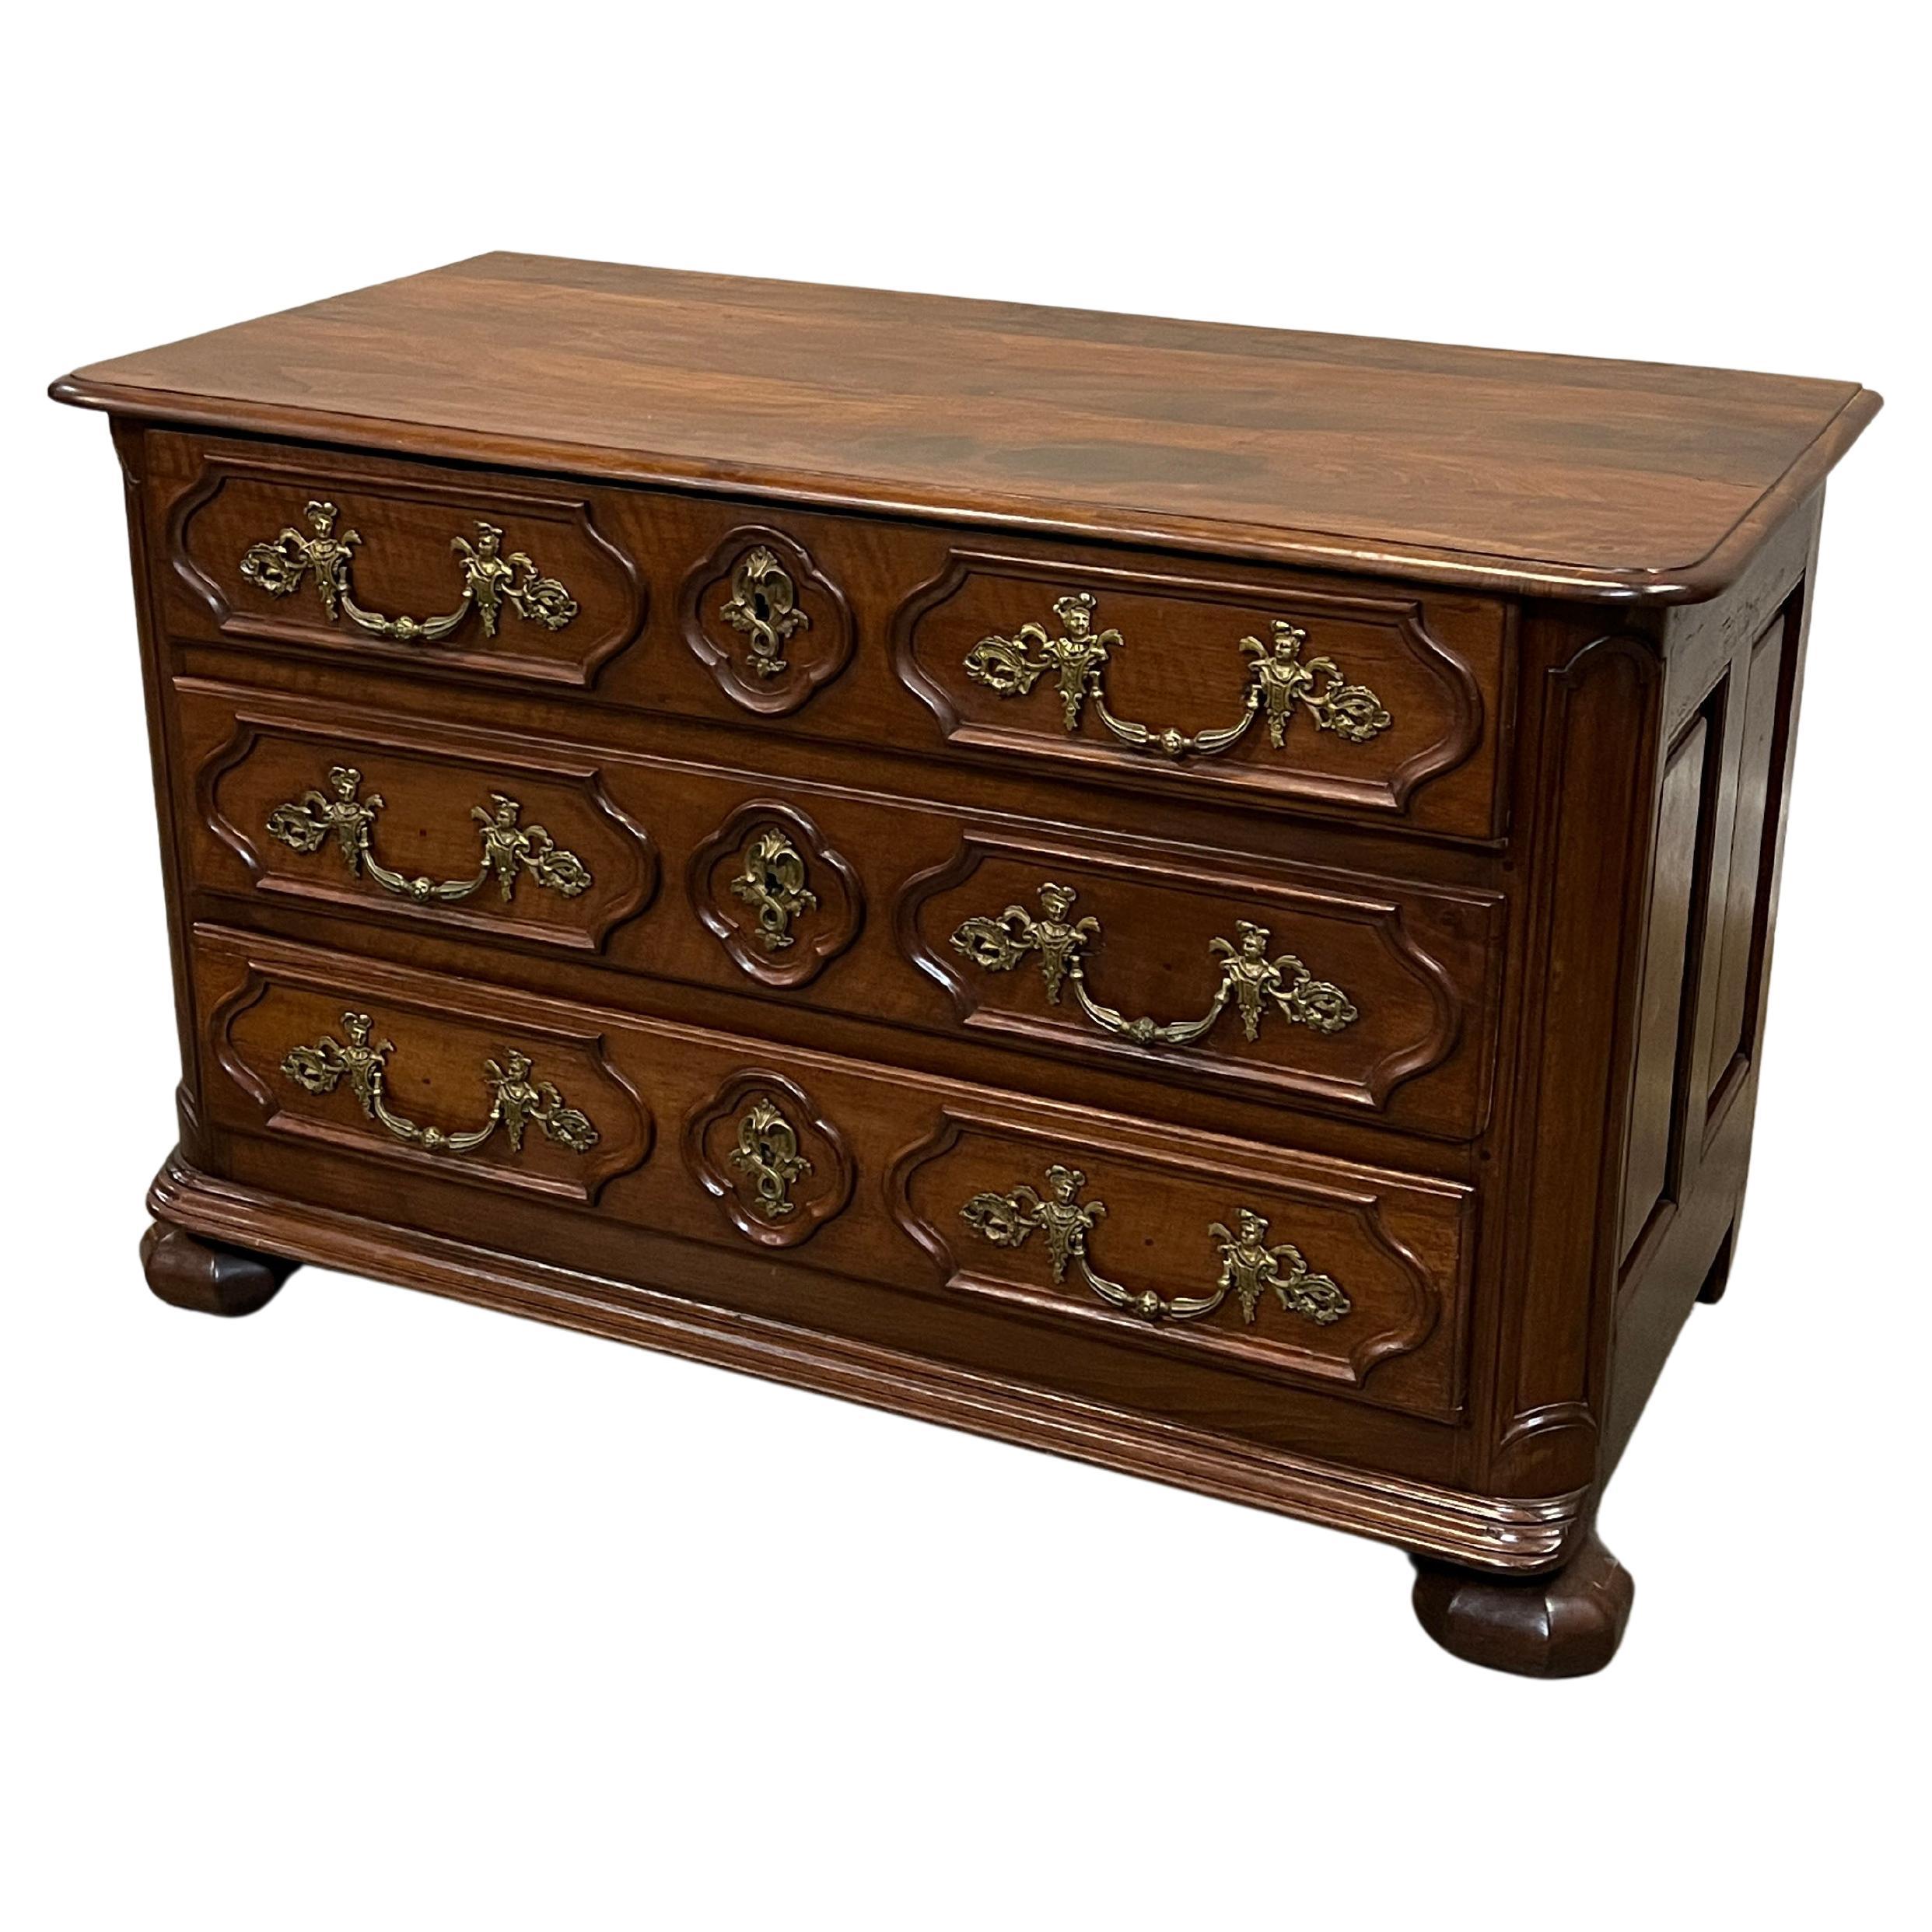 Late 18th Century French Louis XIV Transition Commode in Walnut For Sale